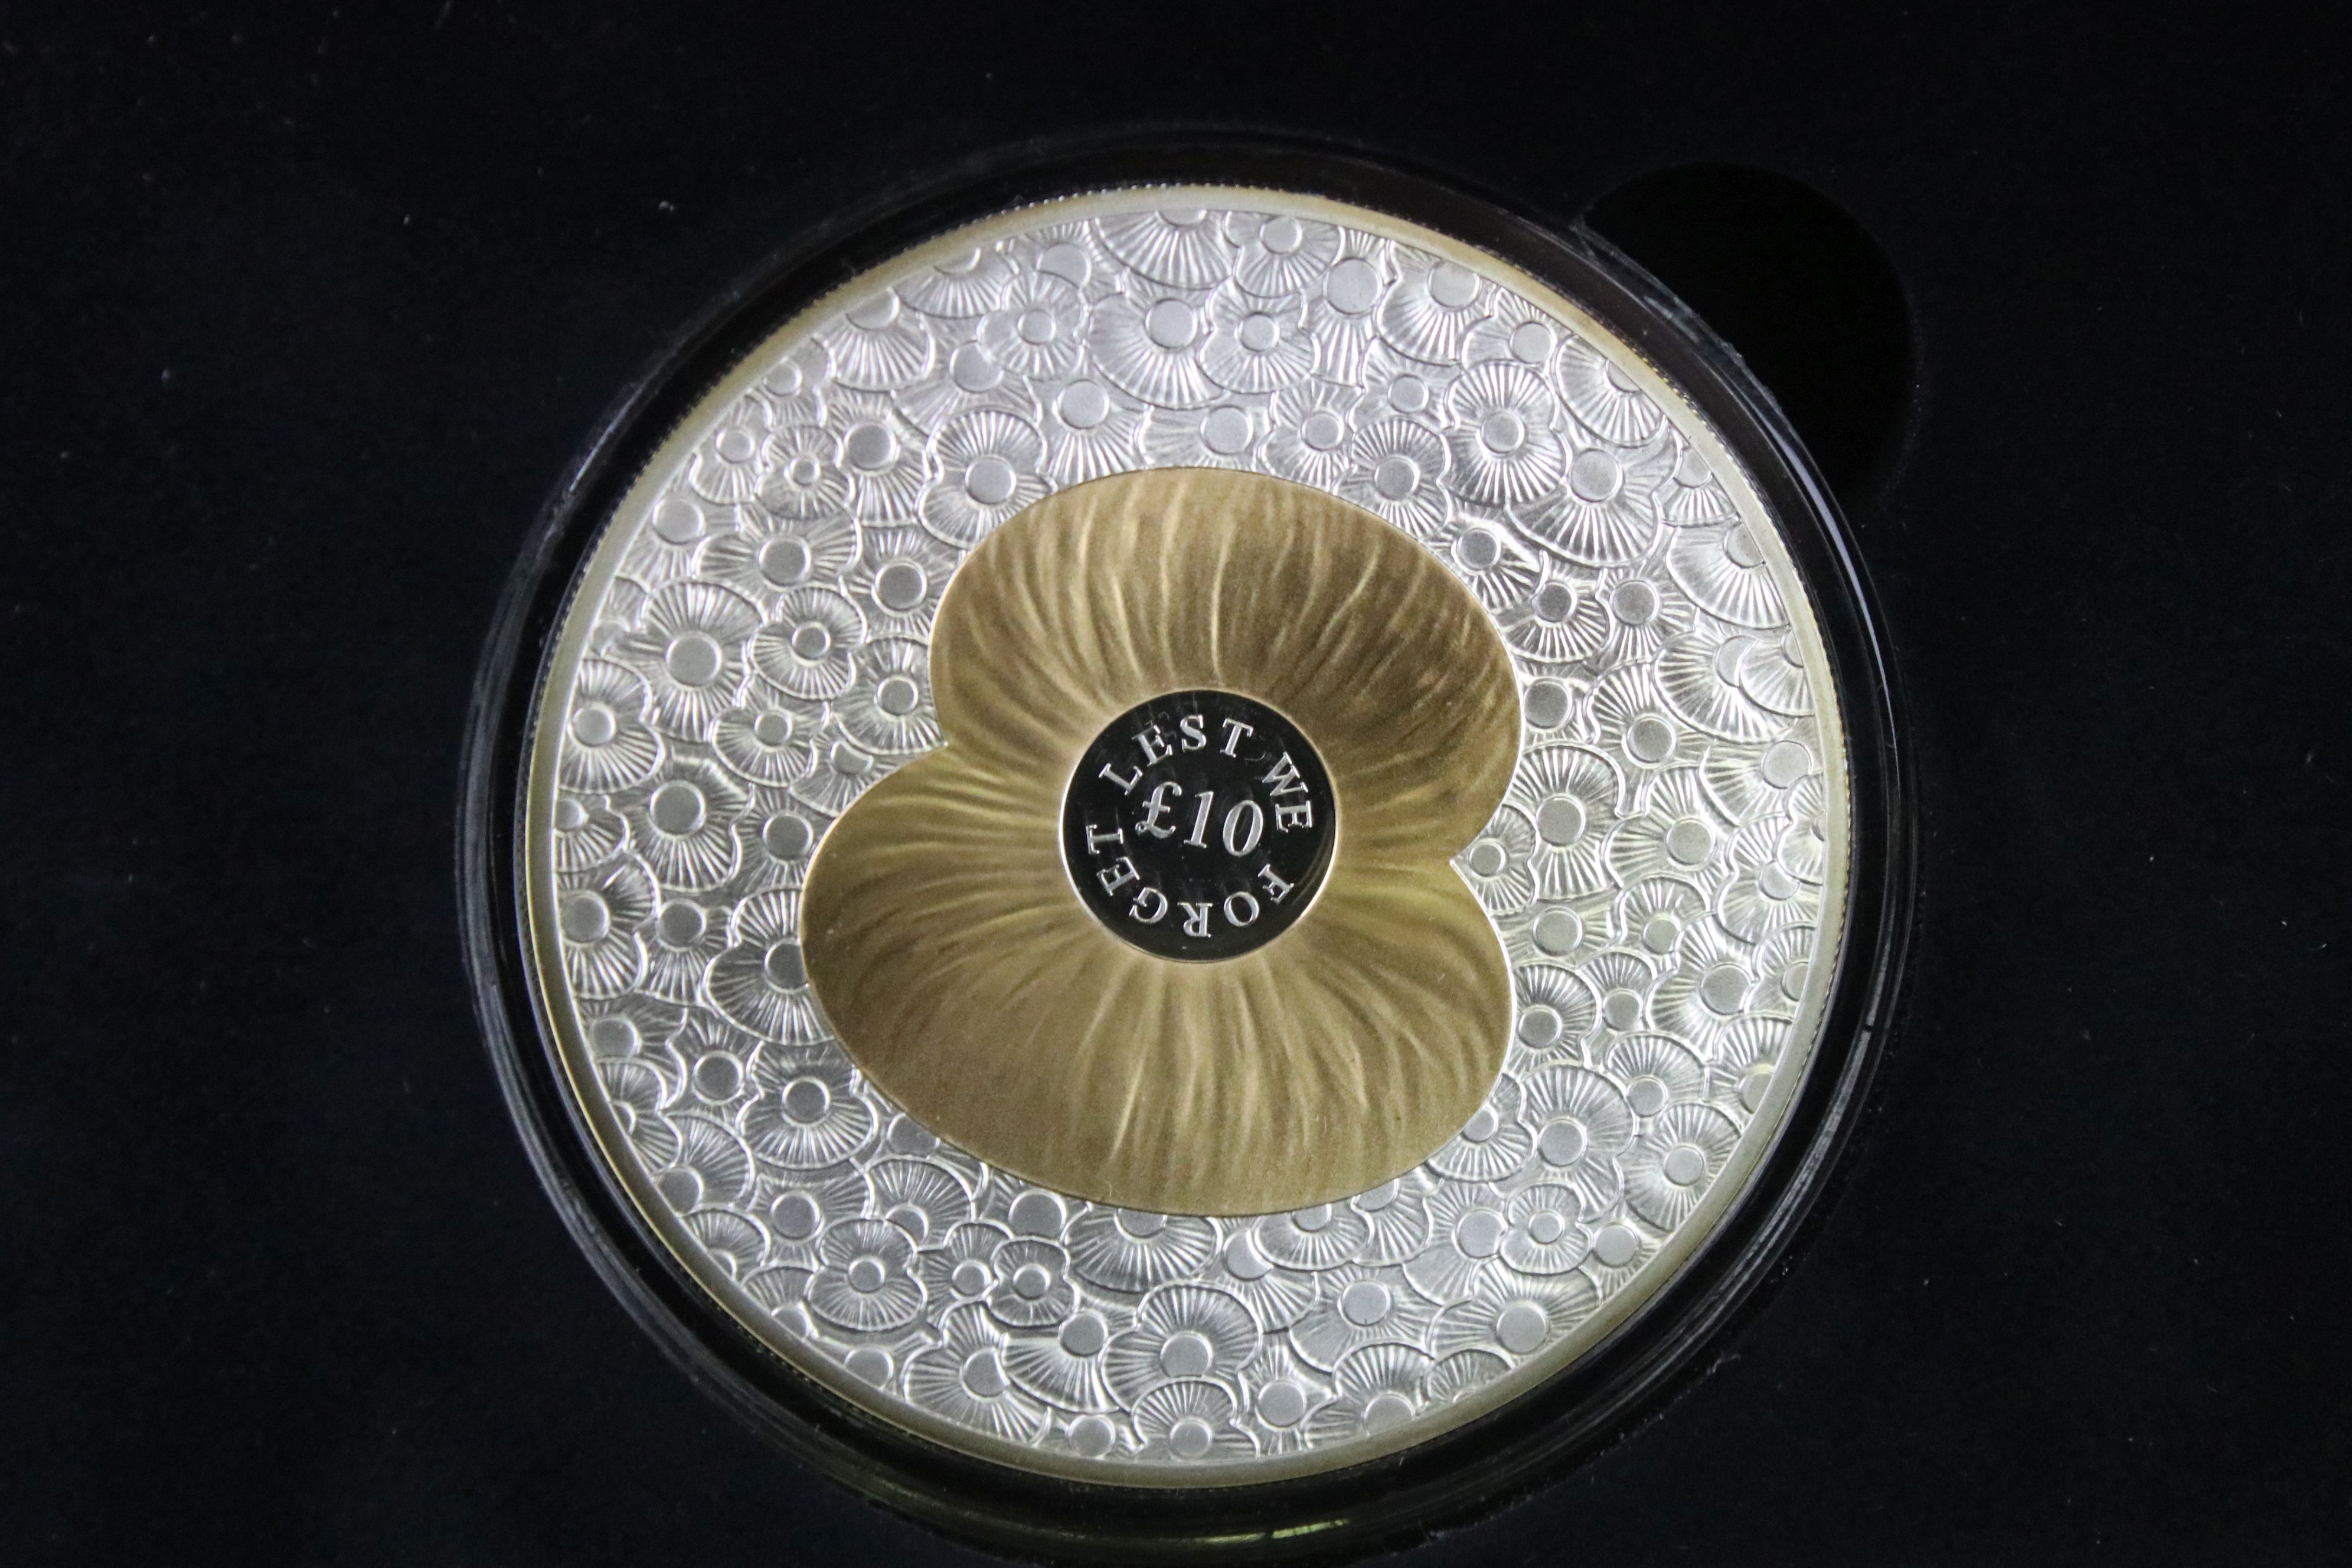 A Queen Elizabeth II 2014 The 100 Poppies silver 5oz coin, encapsulated within fitted display case - Image 3 of 5